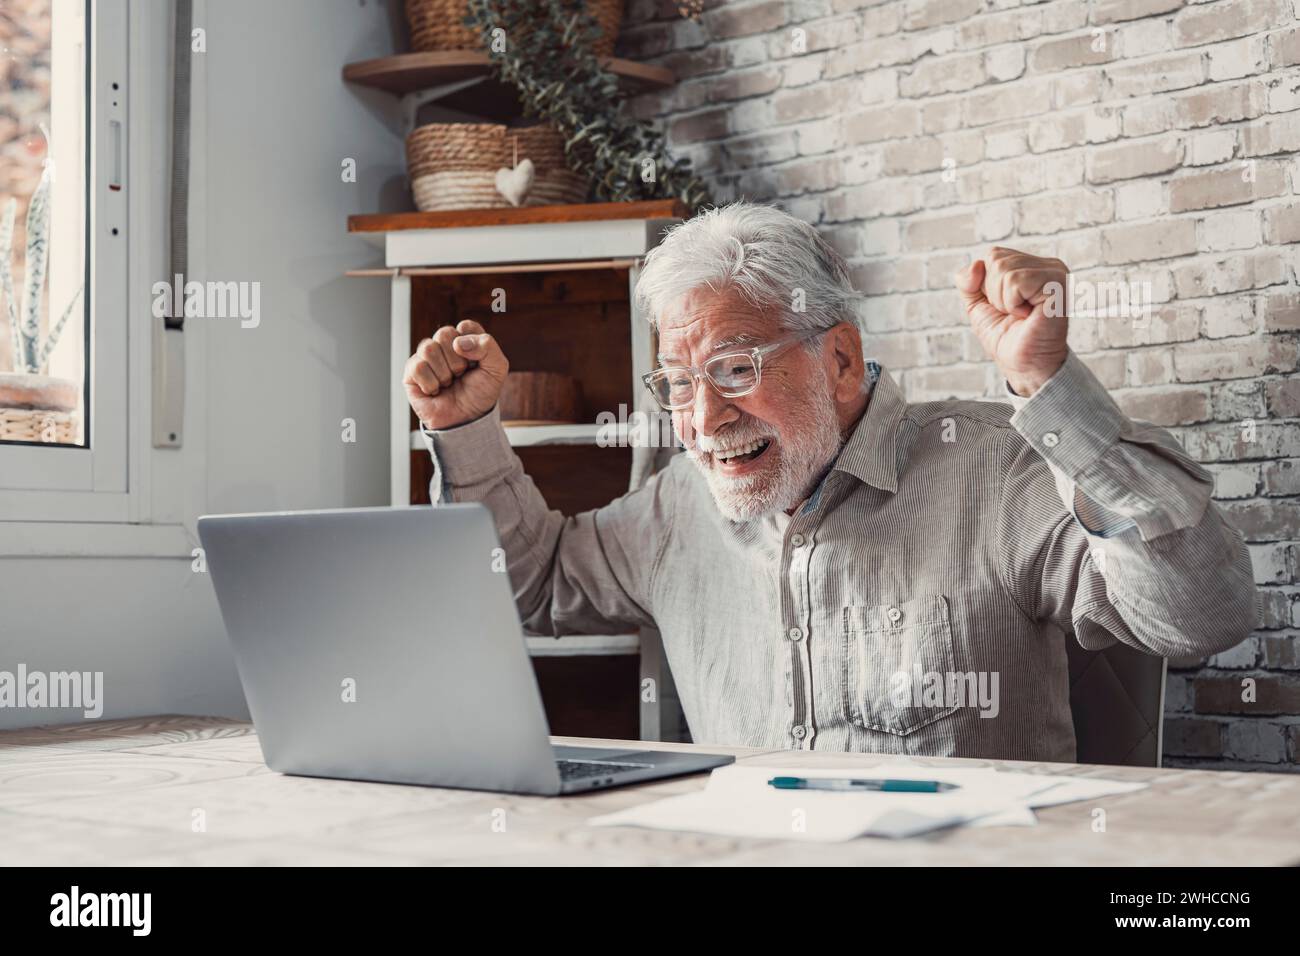 Happy excited old elderly man winner excited by reading good news looking at laptop, overjoyed senior mature grandfather watching game online celebrating goal bid bet win great result victory concept Stock Photo